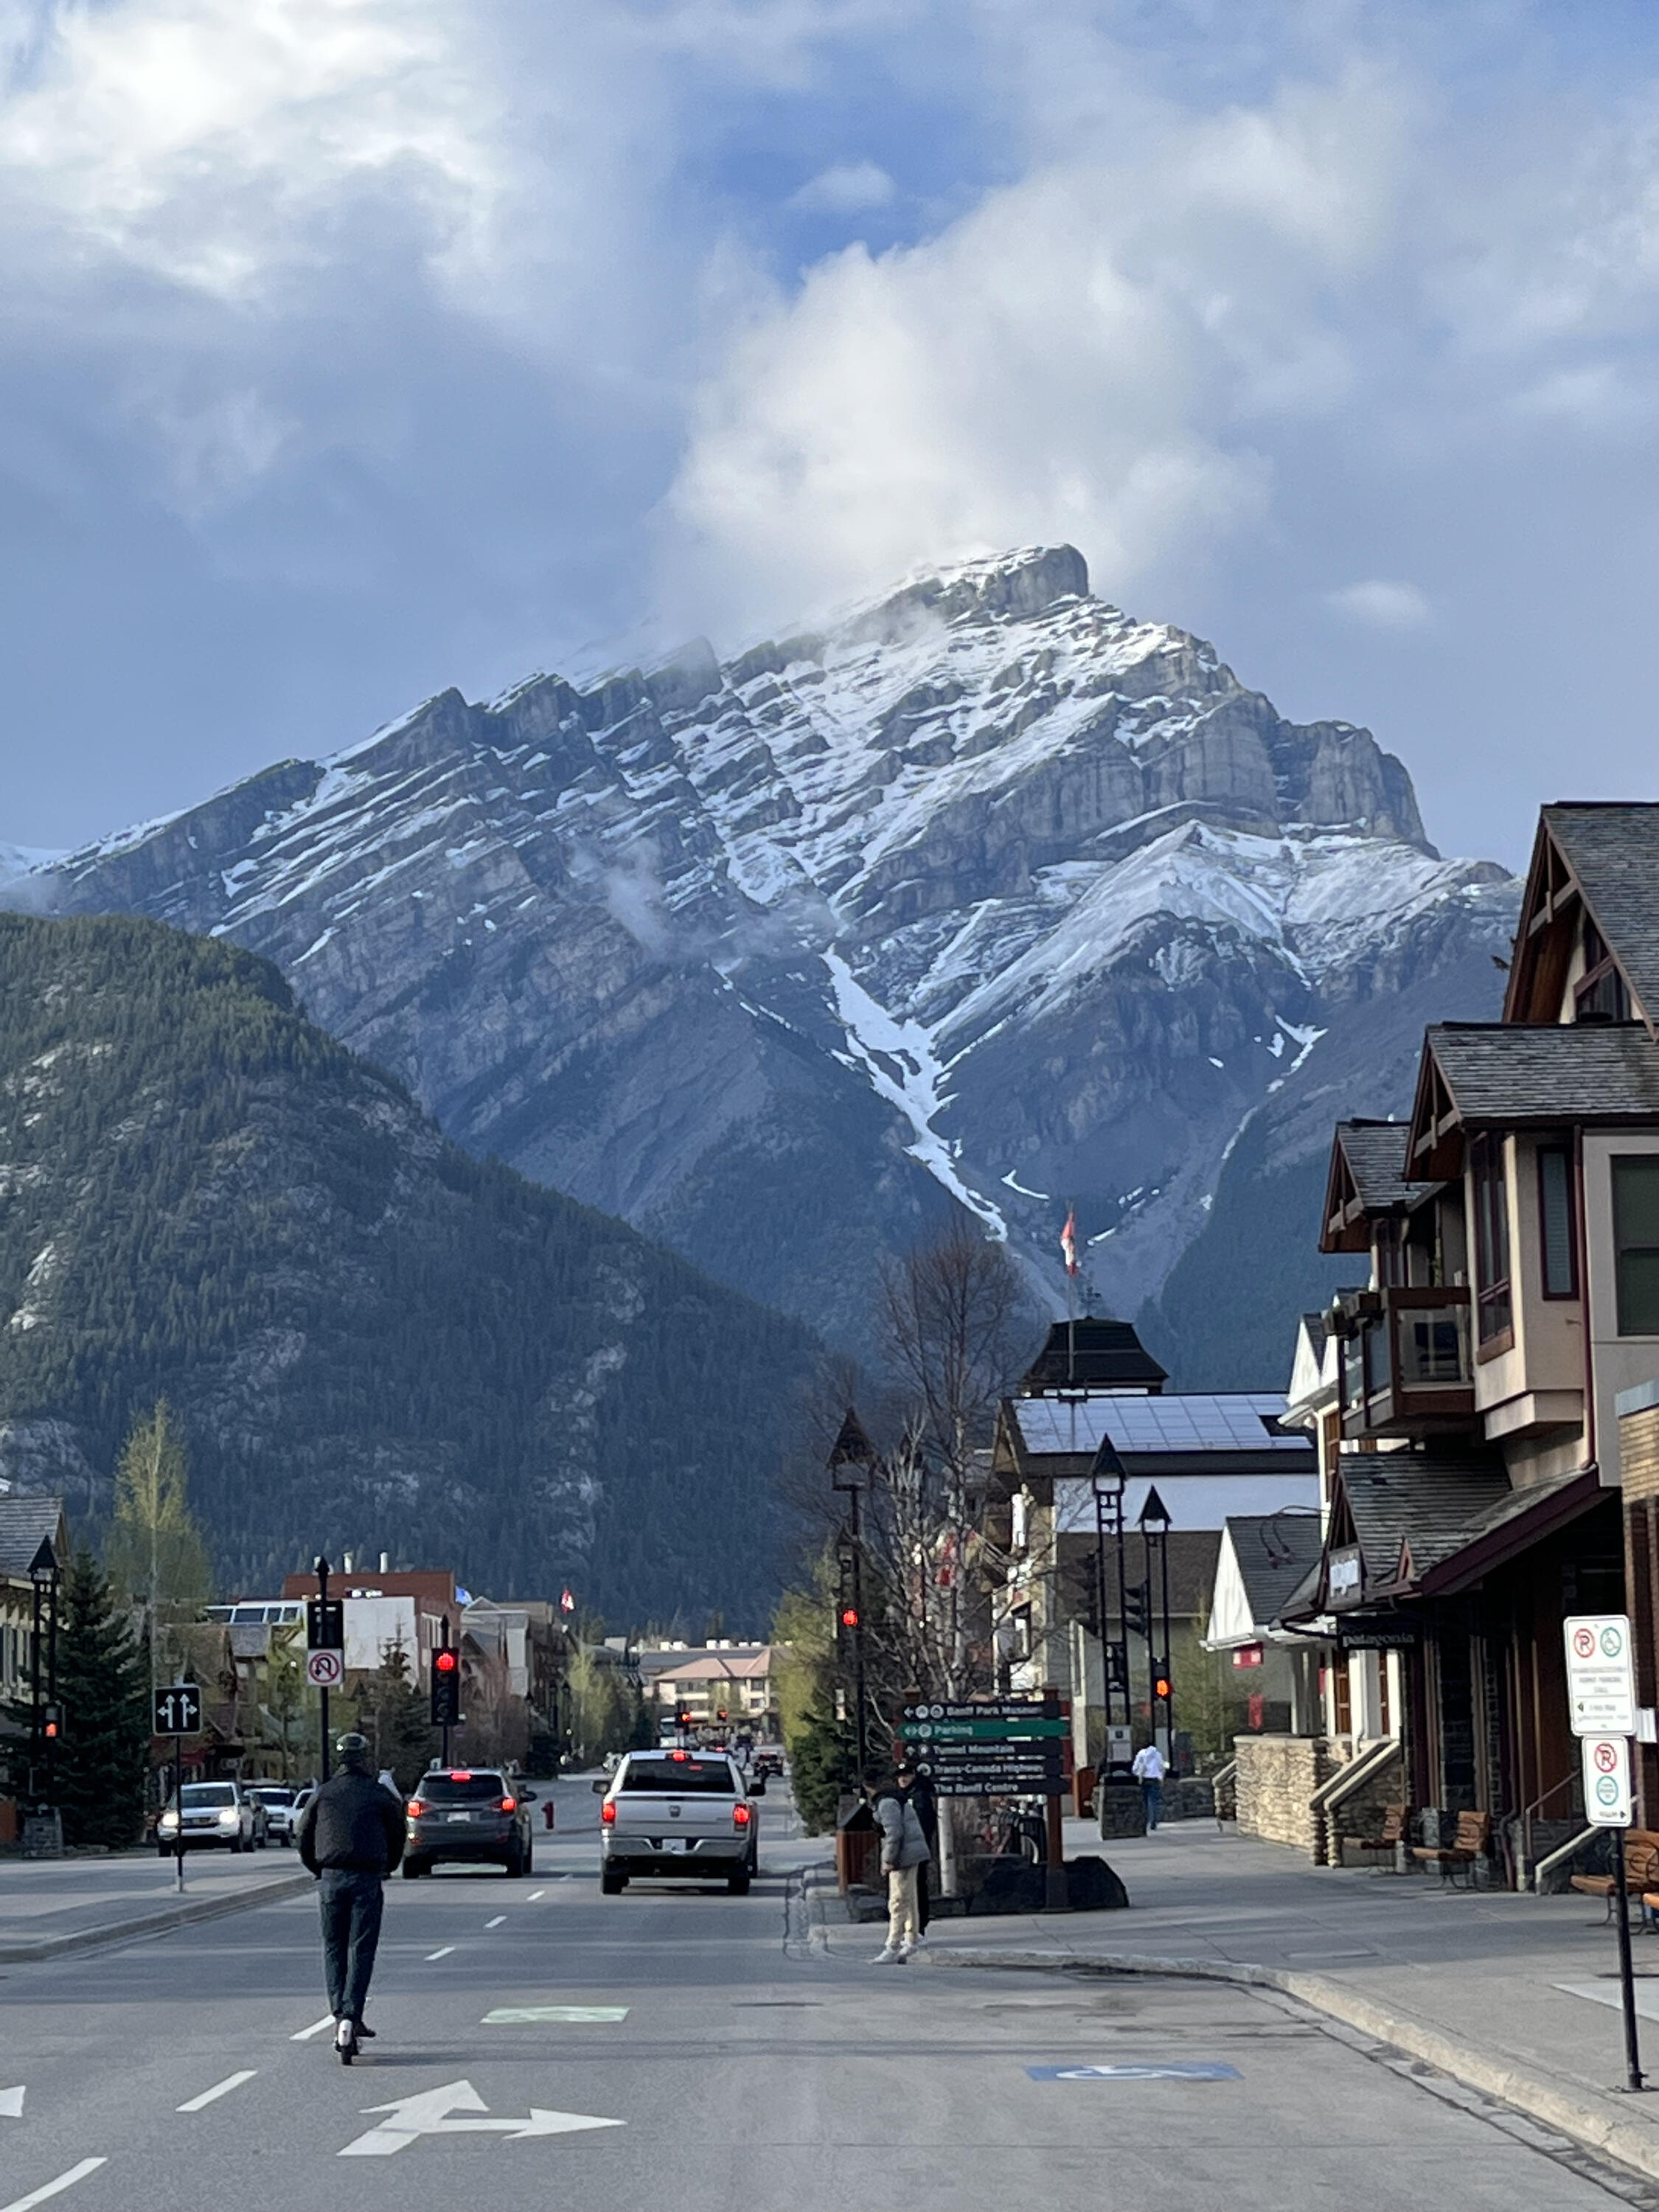 Photo from streets of Banff facing the mountain